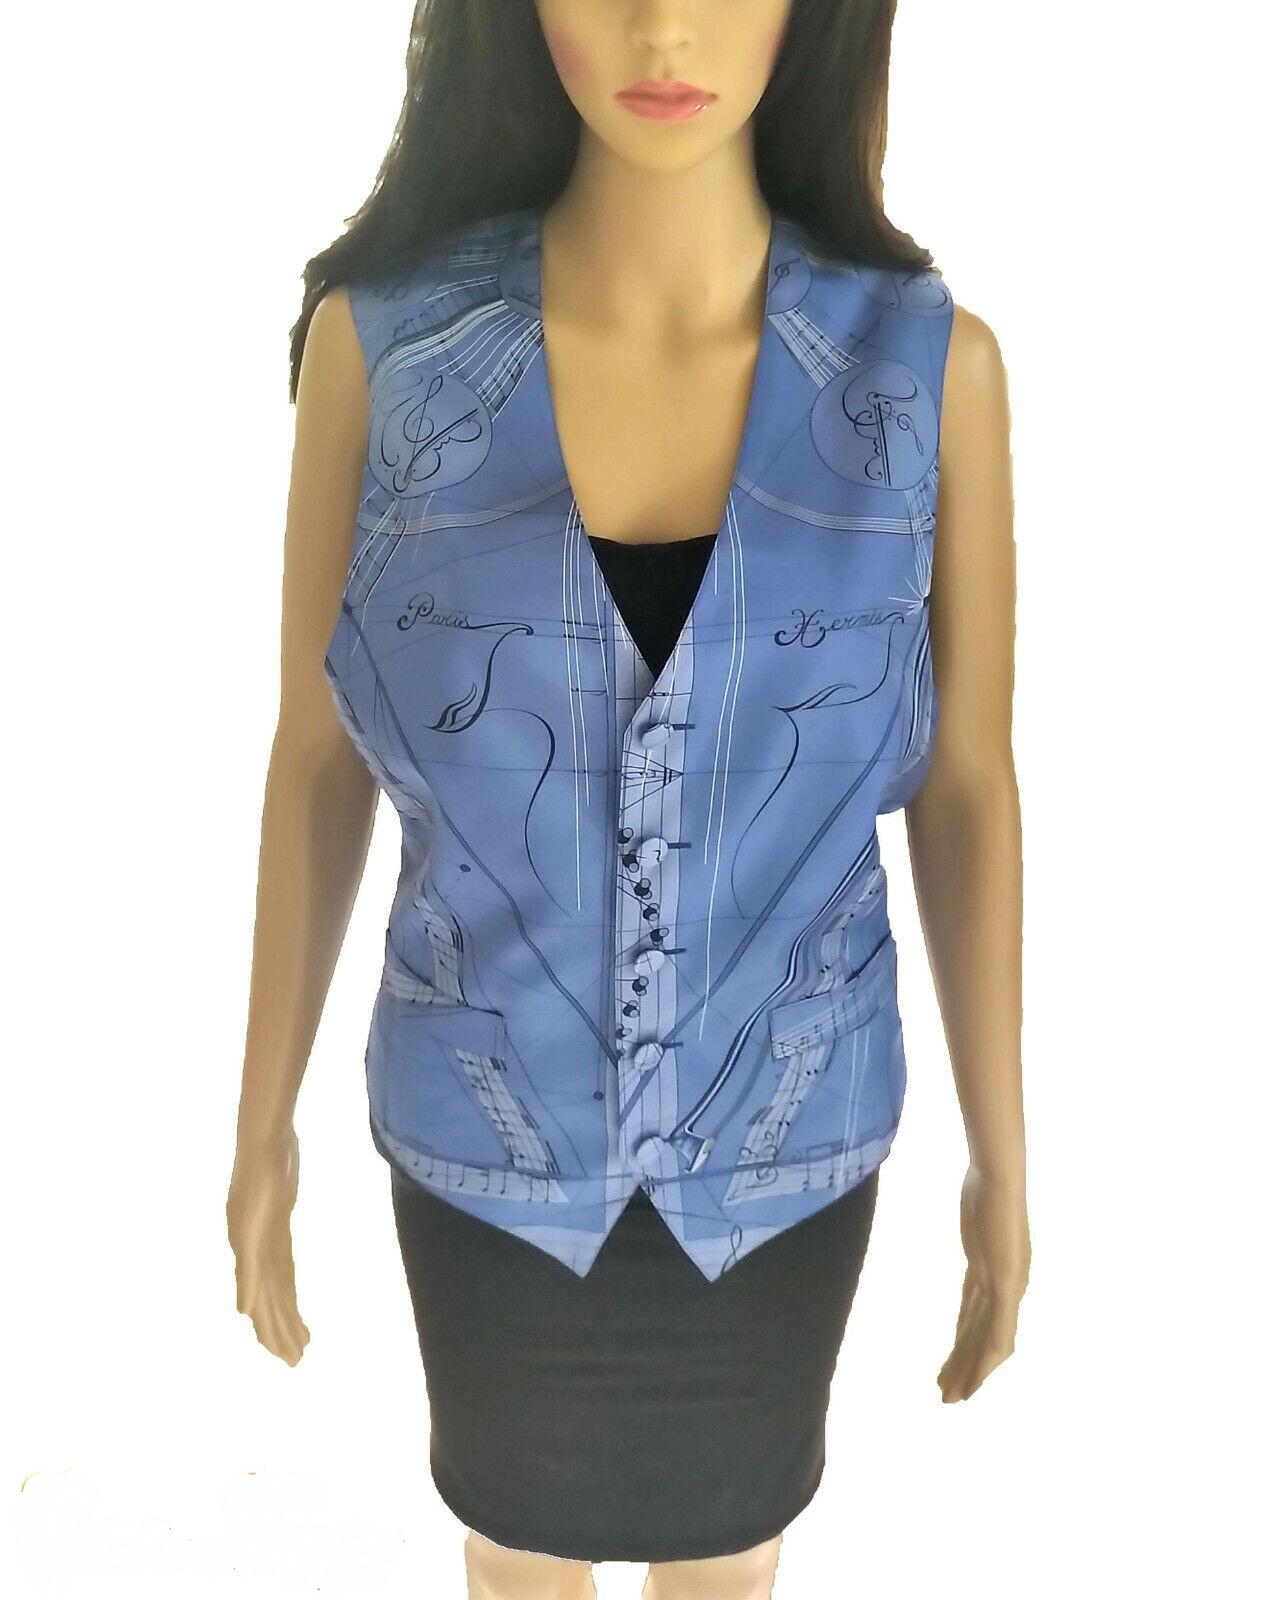 Lovely, Hermès La Musique D' Hermes French blue 100% silk scarf print vest in size FR 38/ US 6. Extremely rare vest, circa late 1990's. This piece is a true work of art. It is so rich & decadent, with great aesthetic beauty. A lovely tribute to